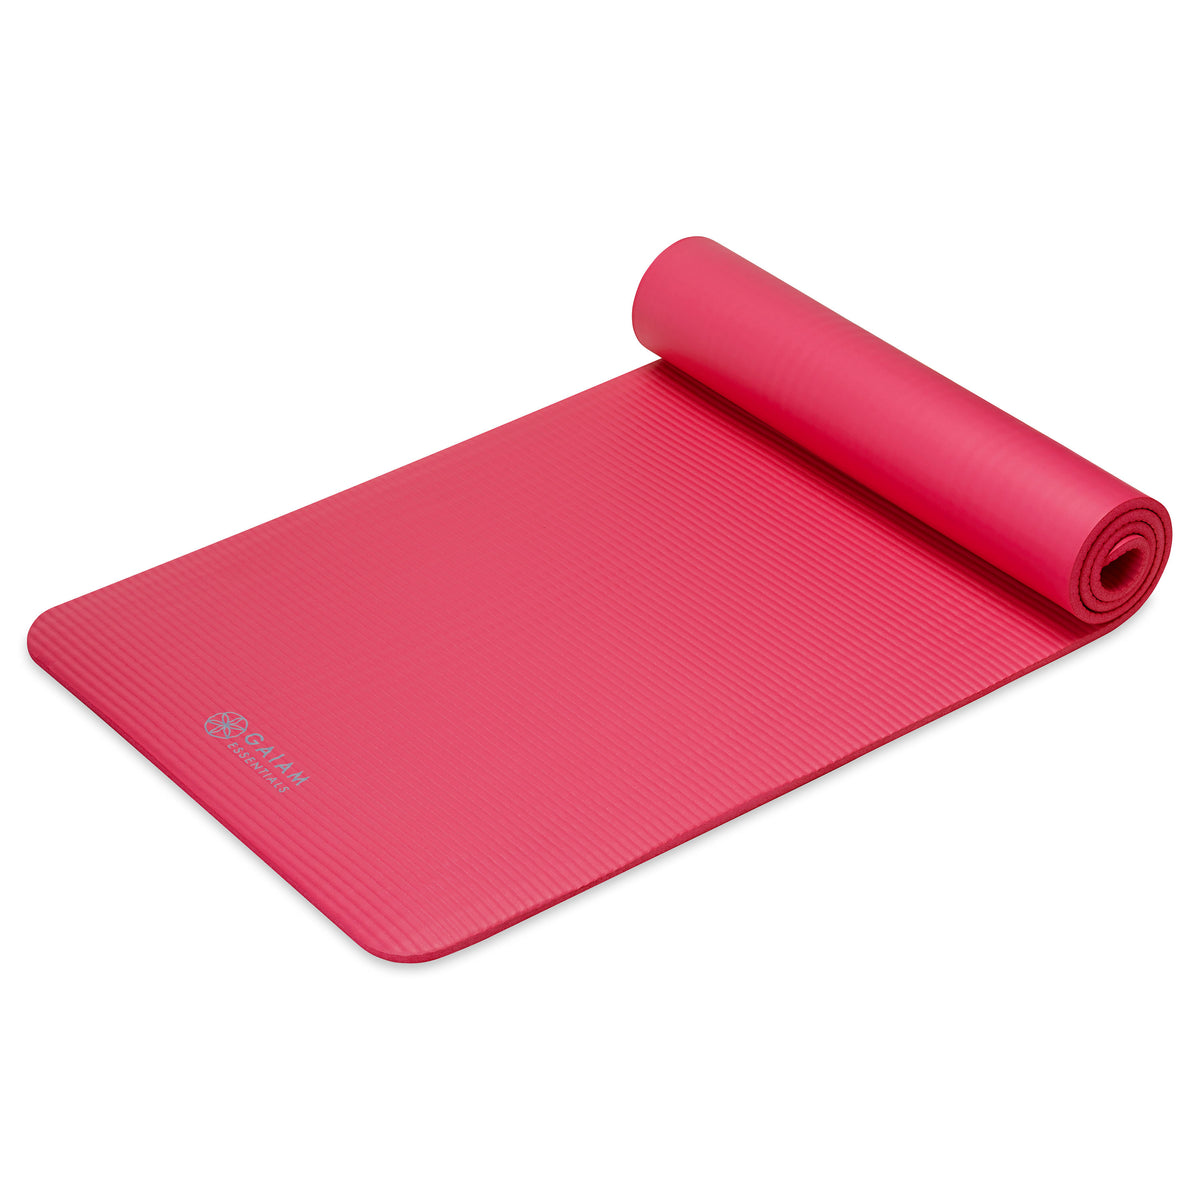 Yoga Mat Pilates Exercise mats with Carry Strap 4mm Thickness Pad